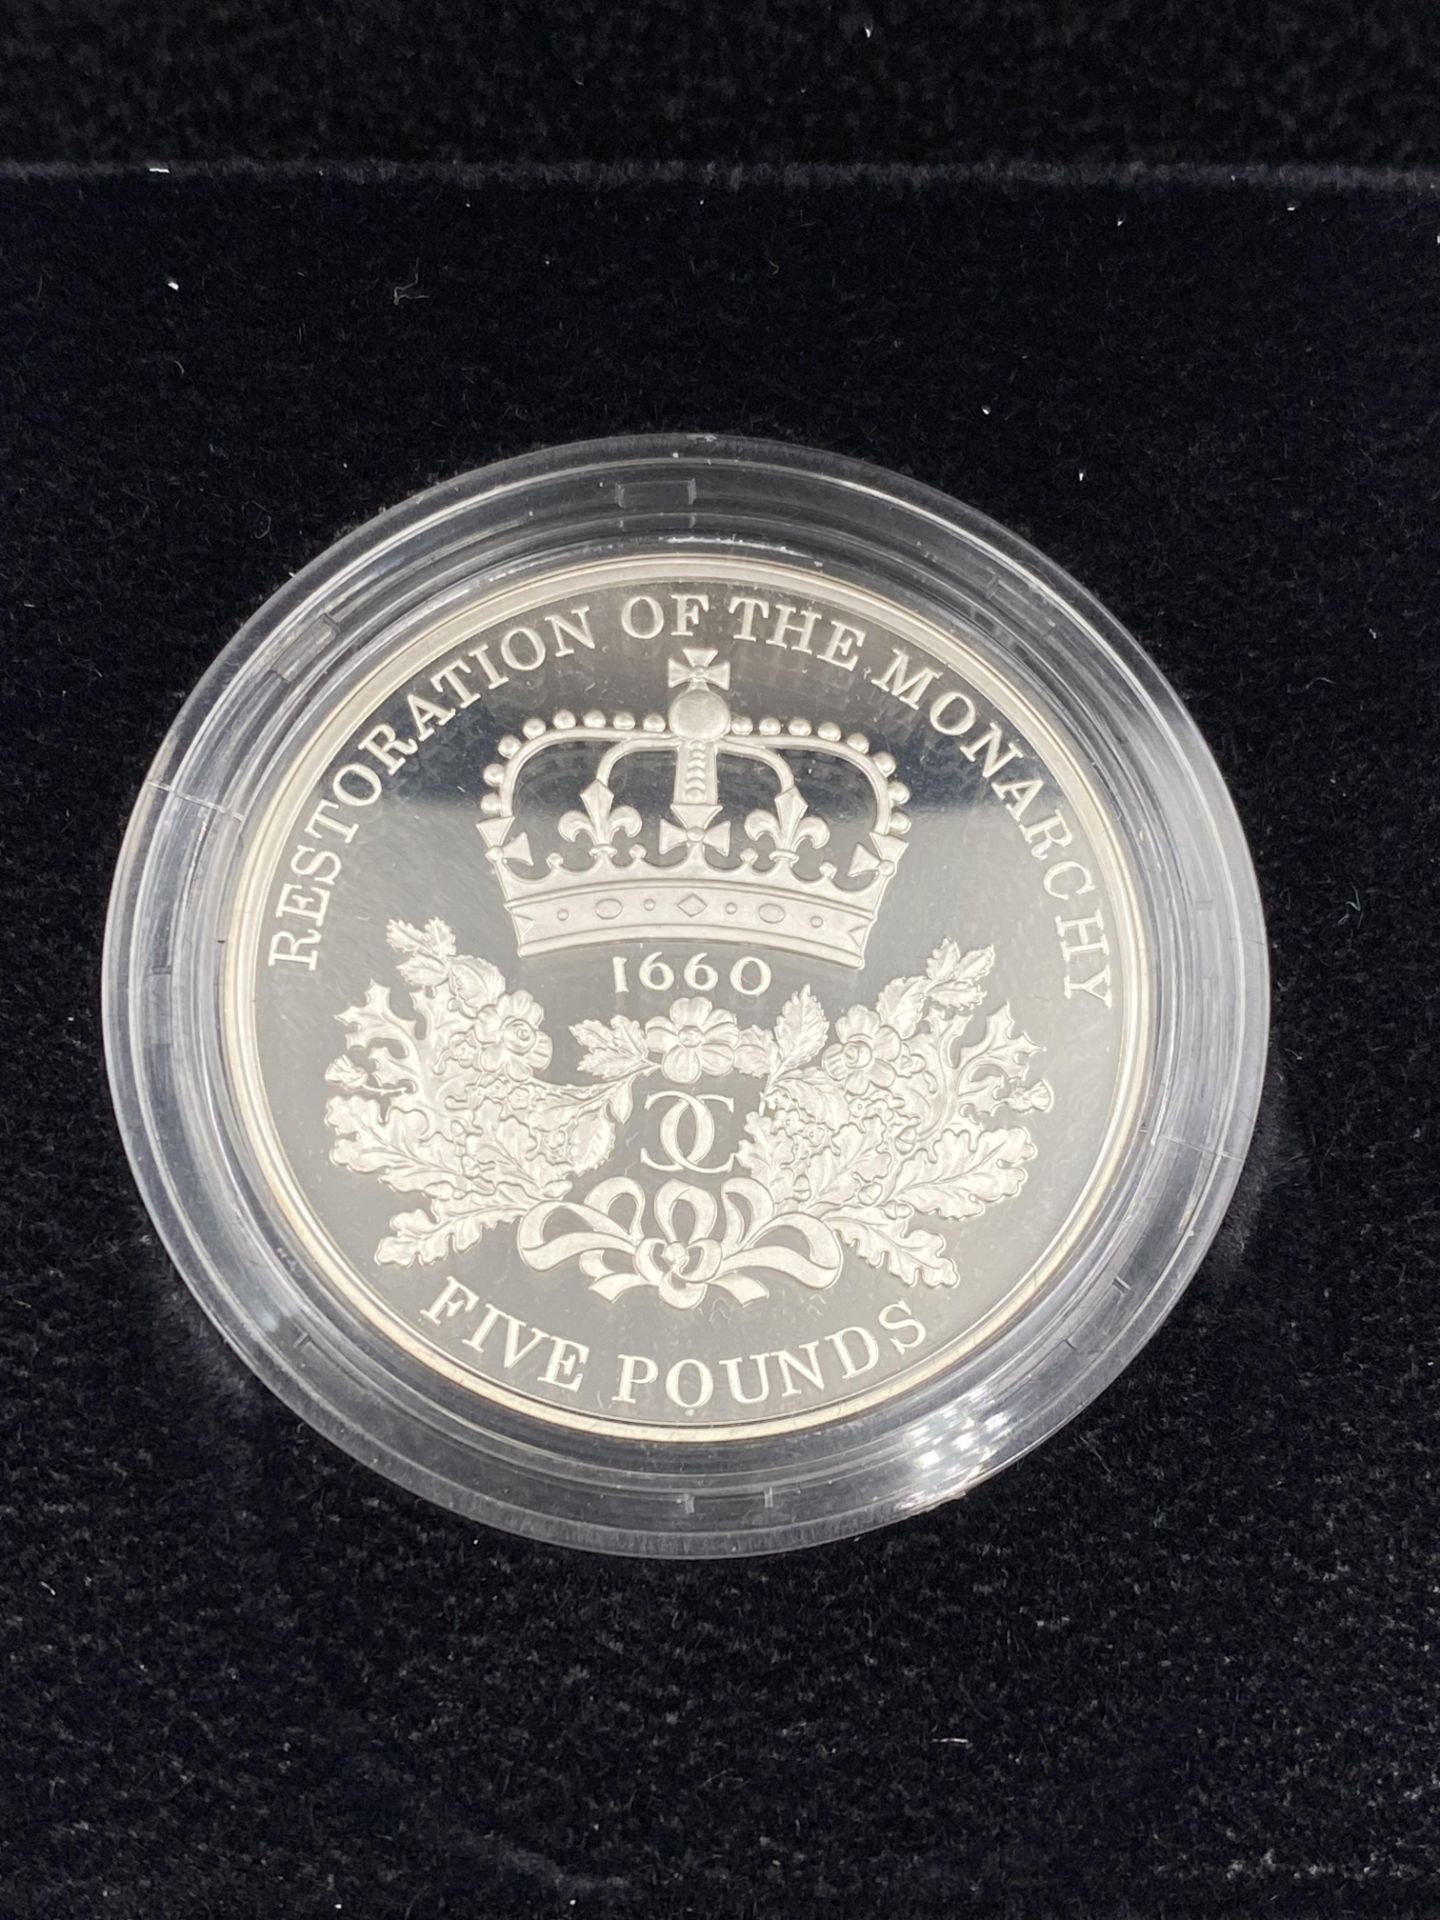 Royal Mint 2010 Restoration of the Monarchy £5 silver proof coin - Image 2 of 4